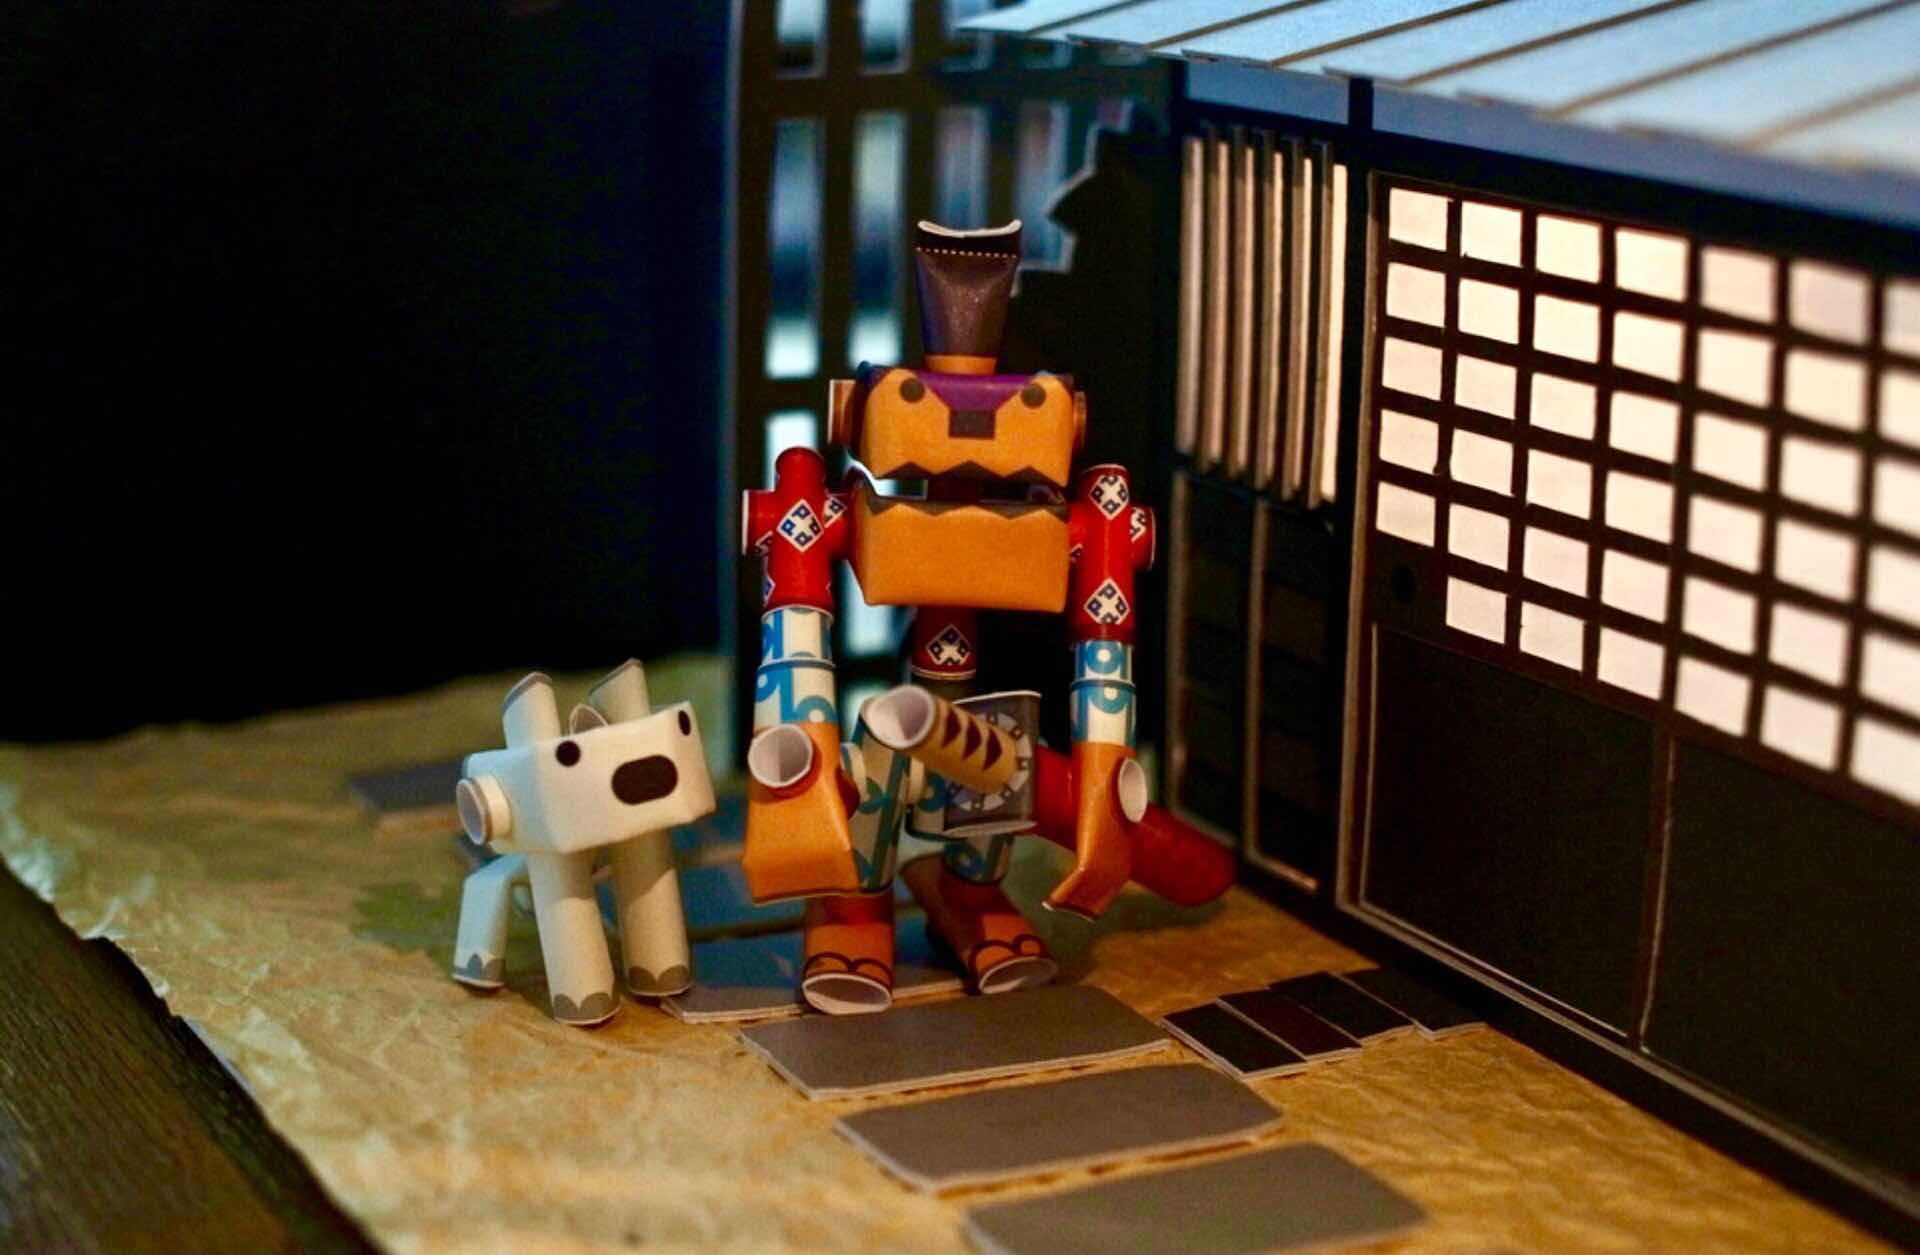 Paper Craft Robot kit from Japan PIPEROID Sweets & Co Photogenic Sisters & Their Brother